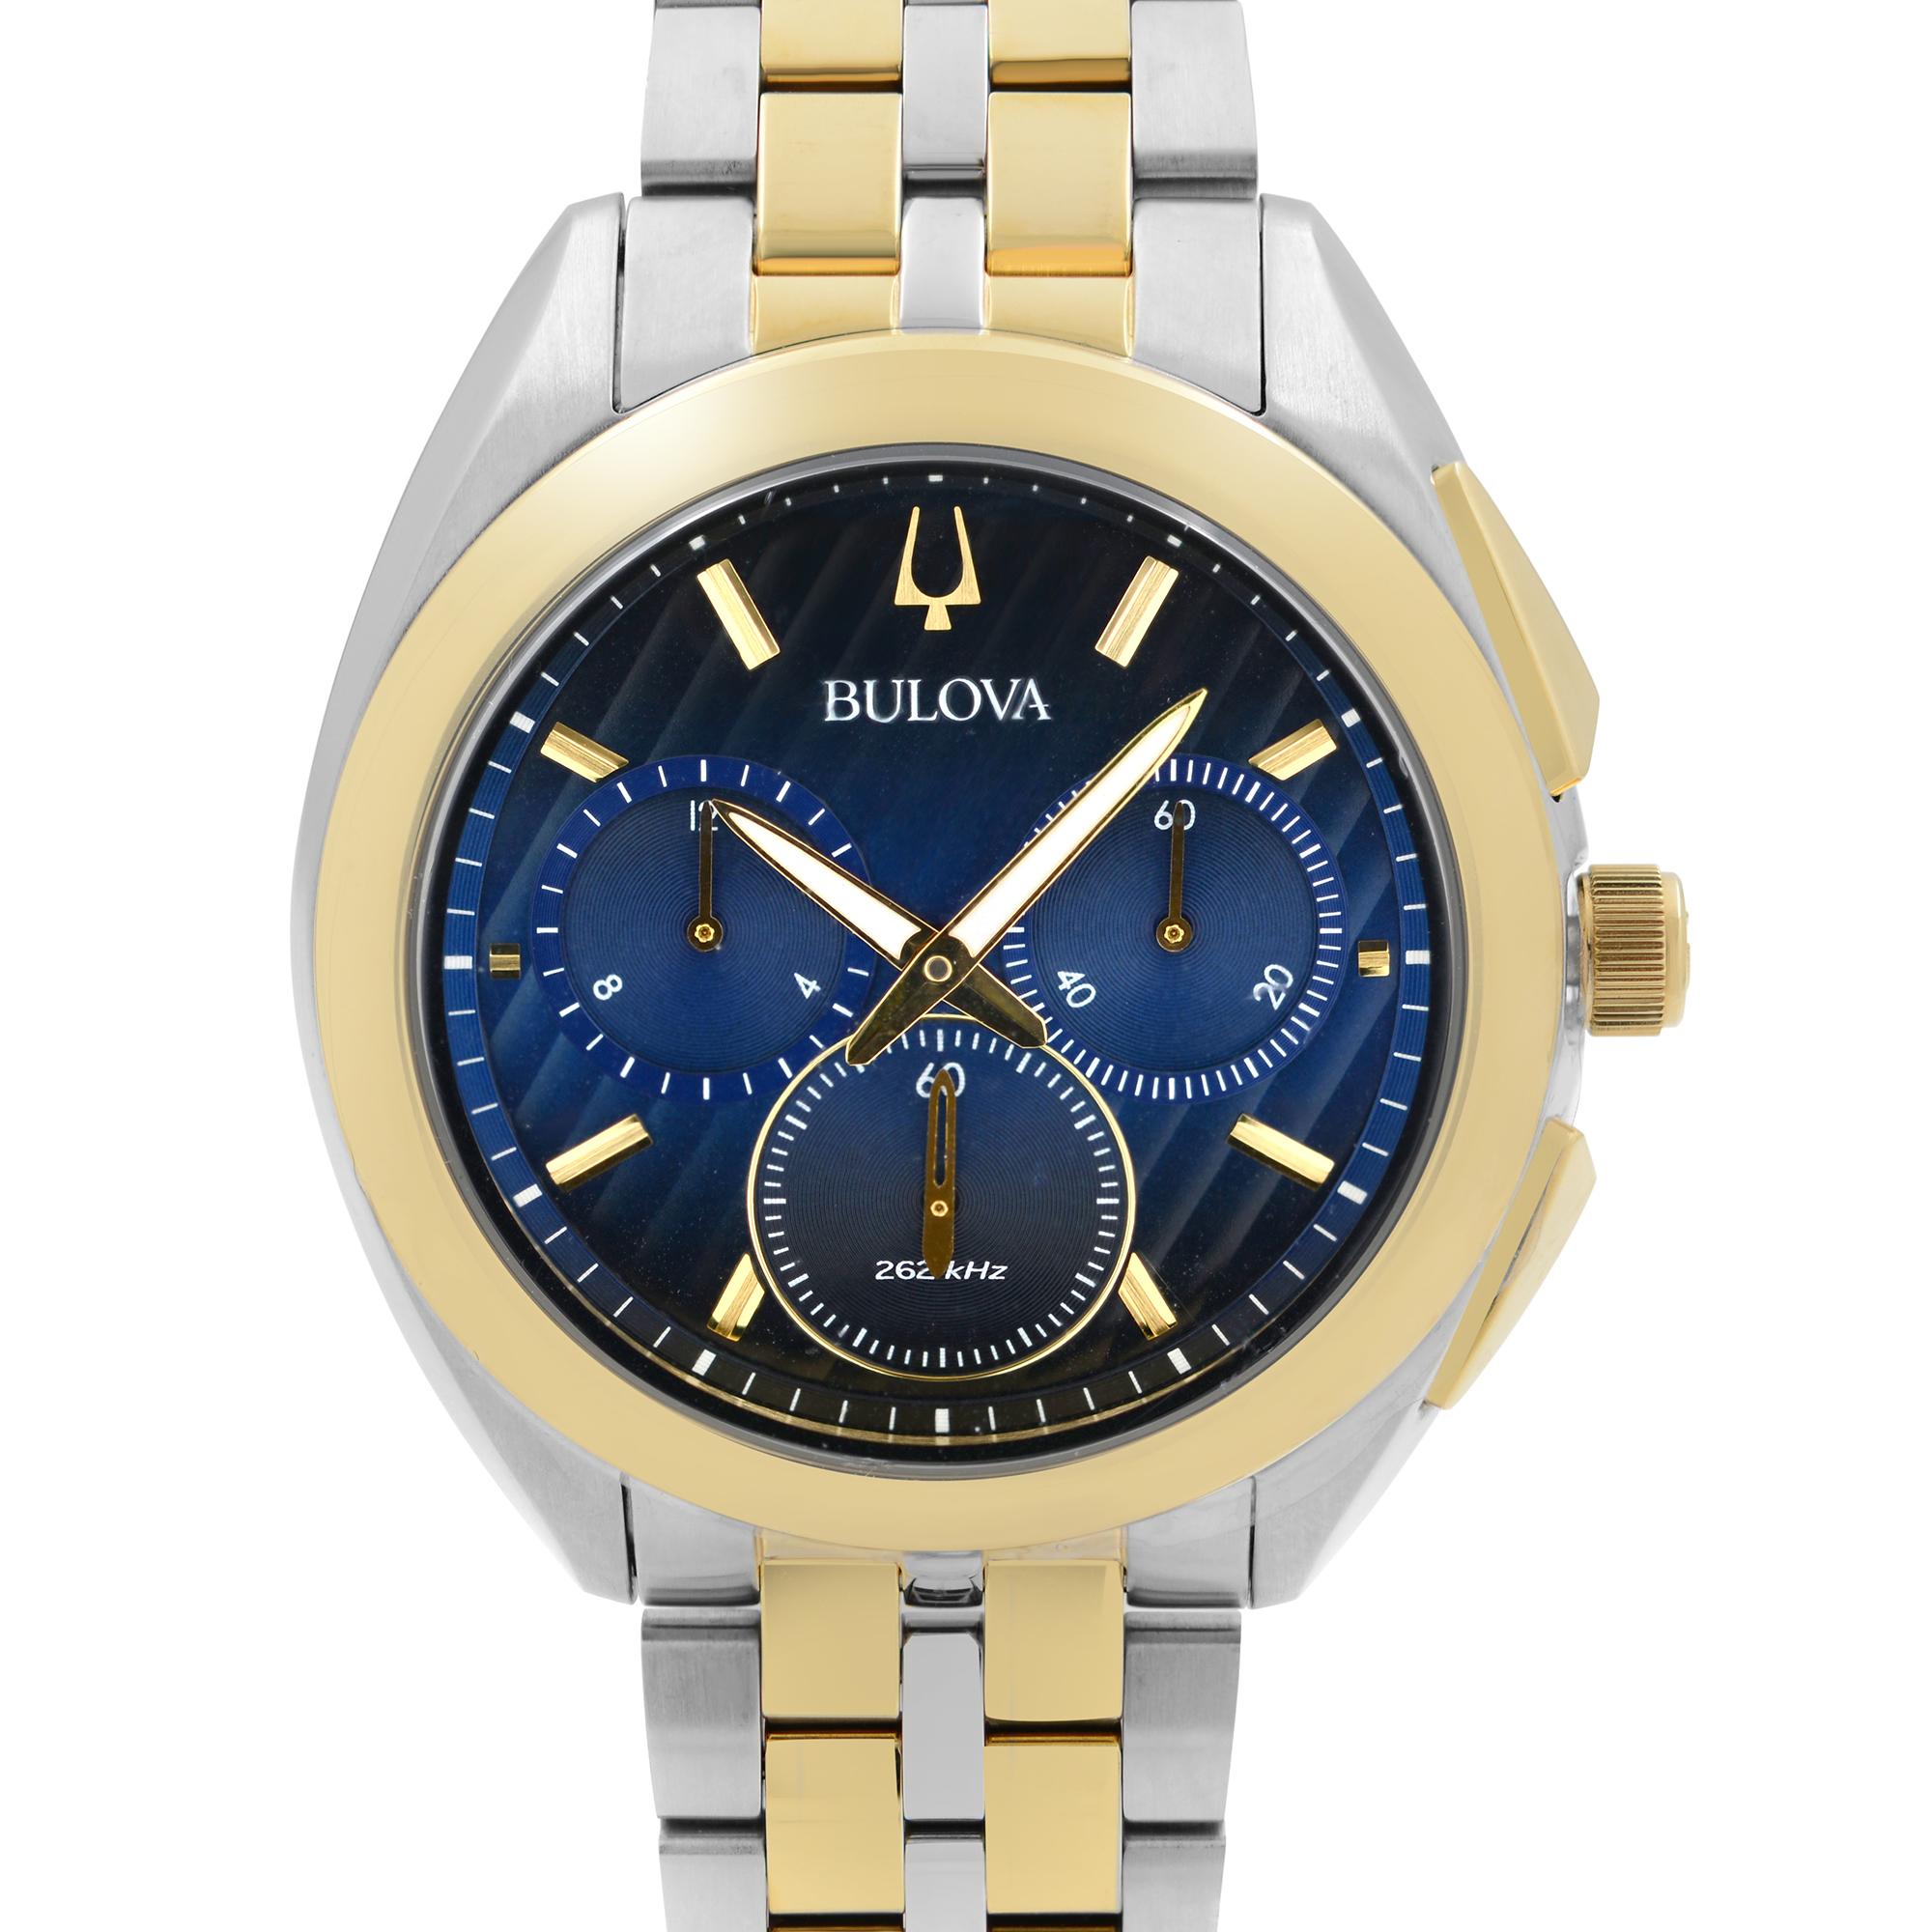 New with Defects Bulova Curv Men's Watch 98A159. The Watch has tiny Scratches on the Bezel and Bracelet Due to Storing. This Beautiful Timepiece Features: Stainless Steel Case with a Two-Tone Bracelet, Fixed Yellow Gold-Tone Bezel, Navy Blue Dial